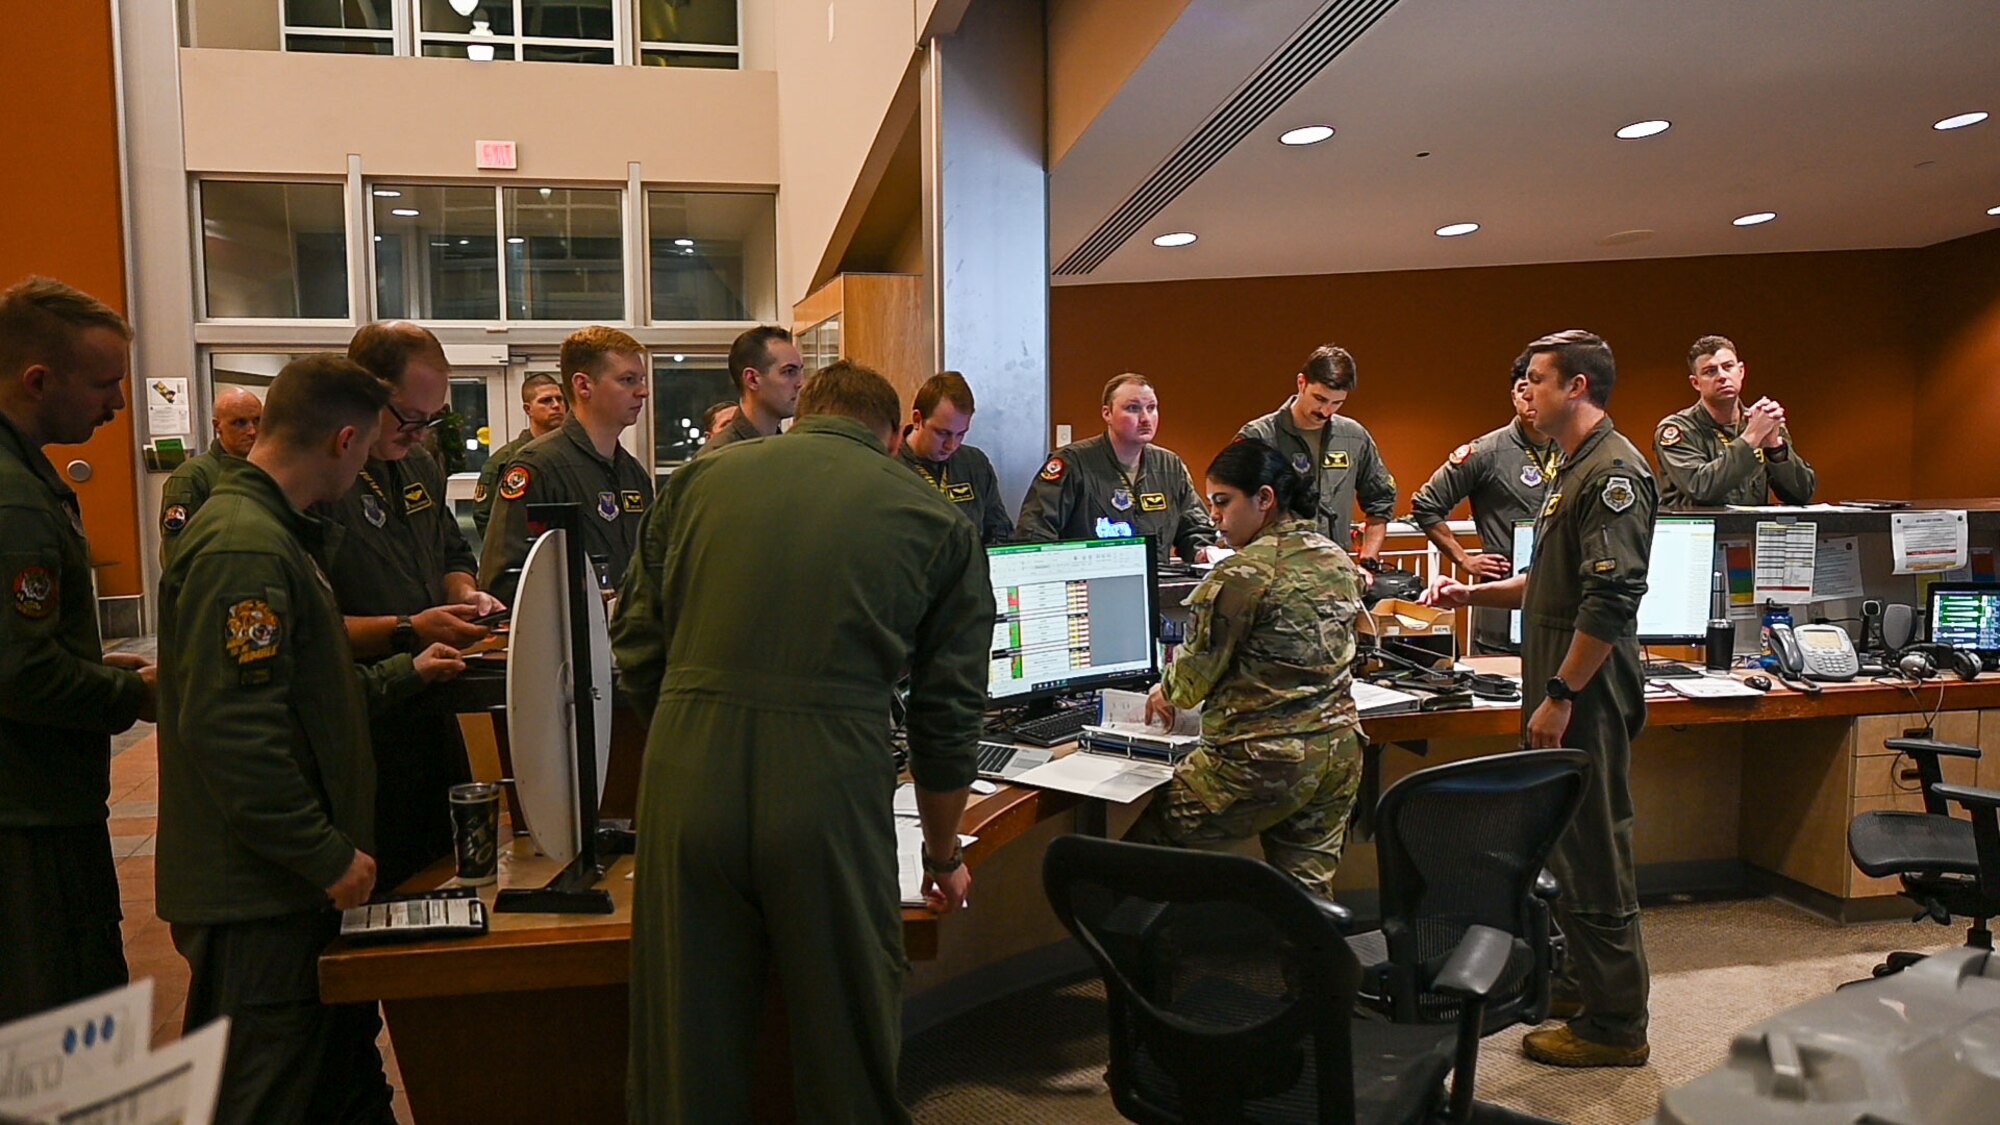 Aircrew from the 37th Bomb Squadron analyze flight information for a CONUS-to-CONUS (C2C) mission to the Indo-Pacific region at Ellsworth Air Force Base, South Dakota, Jan. 9, 2023. C2C missions send pilots out to execute airborne exercise maneuvers anywhere in the world before landing back inside the United States. (U.S. Air Force photo by Airman 1st Class Adam Olson)